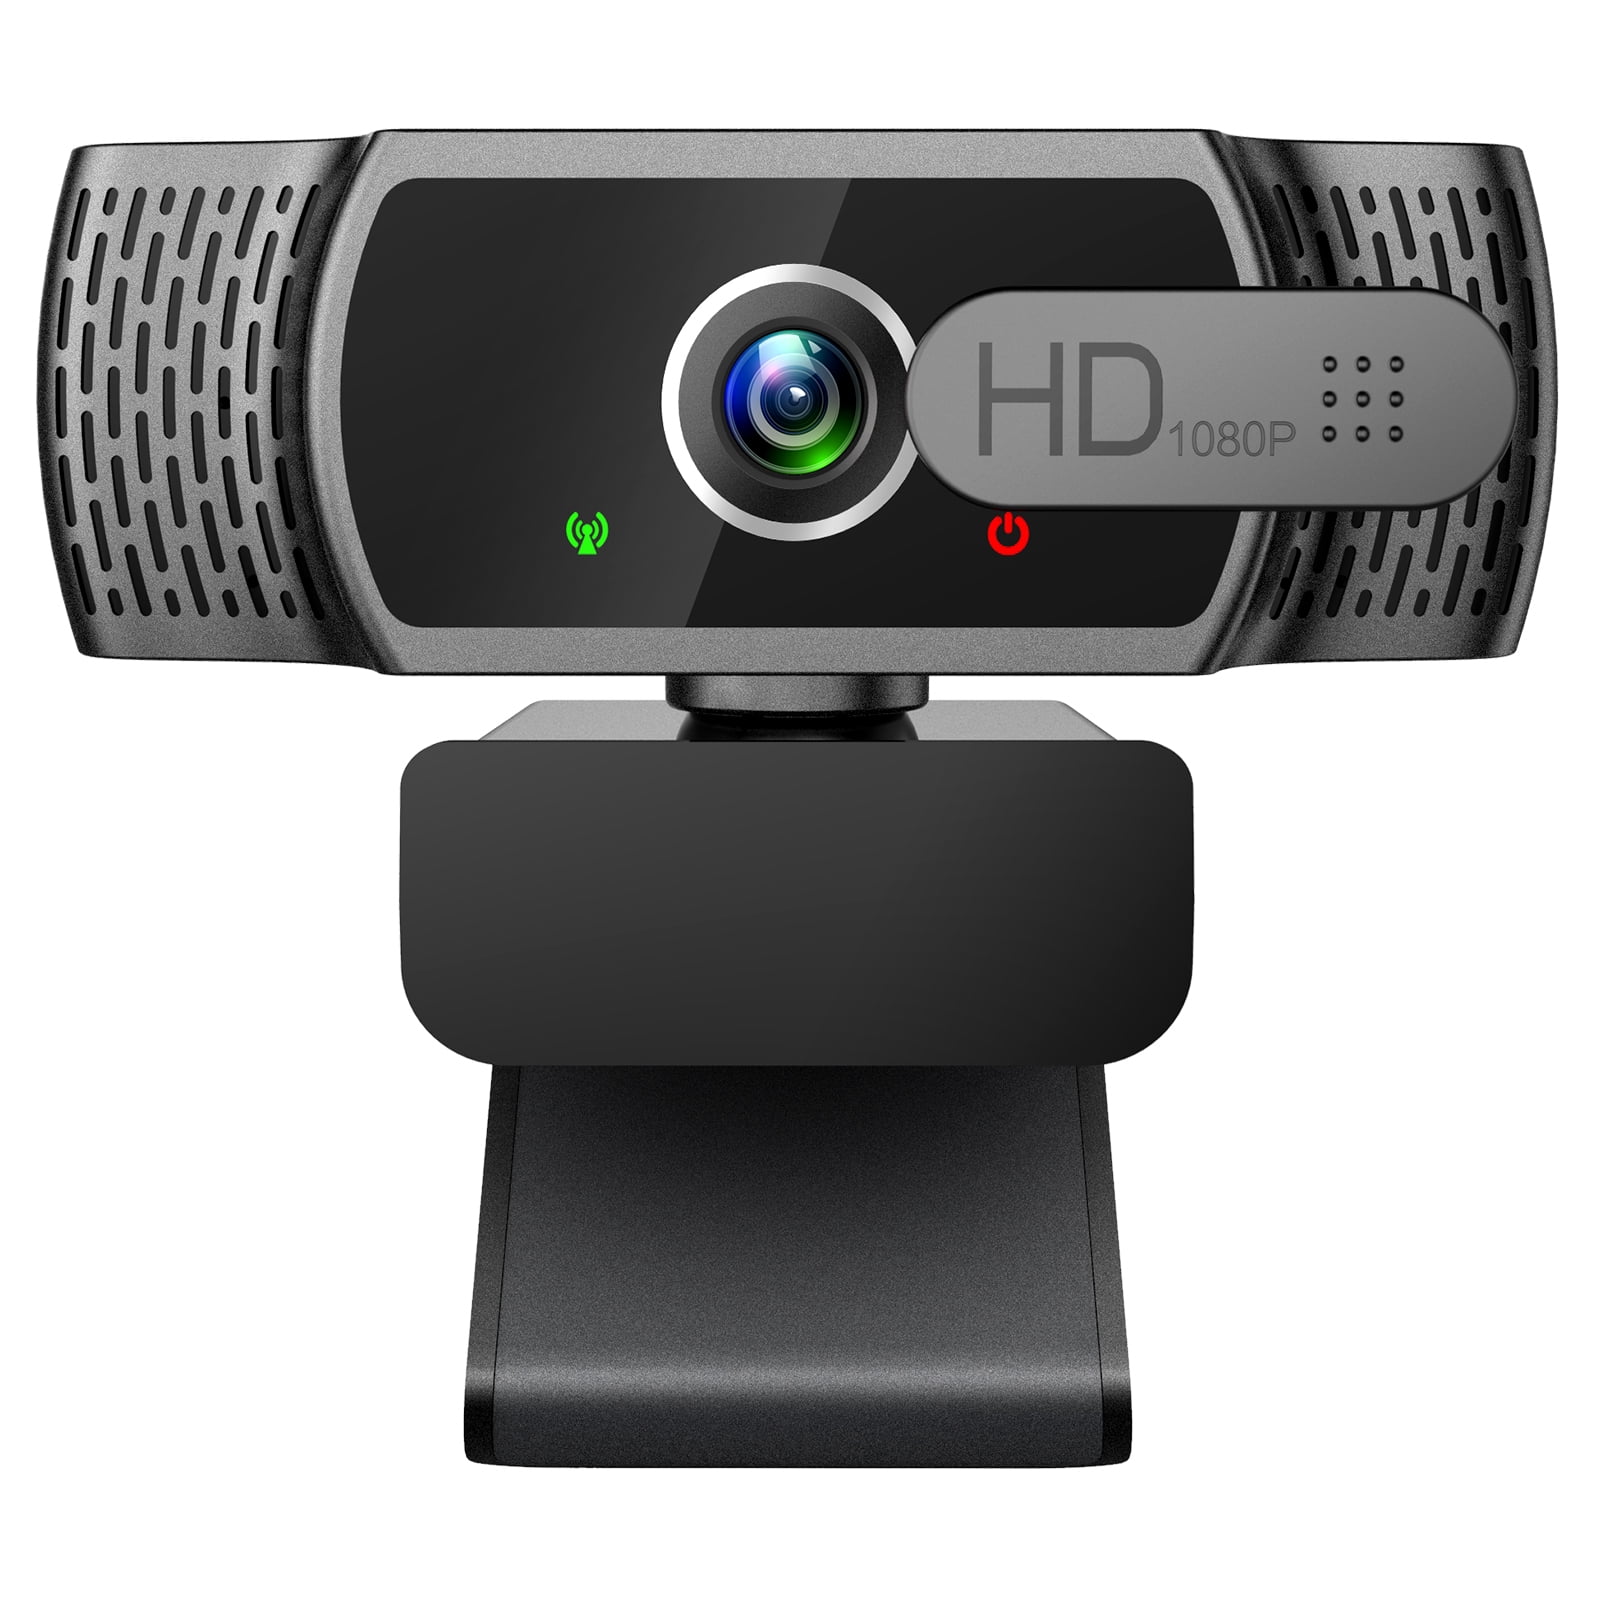 Webcam with Microphone,1080p HD Webcam Streaming Computer Web Camera USB Cable for PC Laptop Desktop Video Calling,Conferencing on line Classes Grey